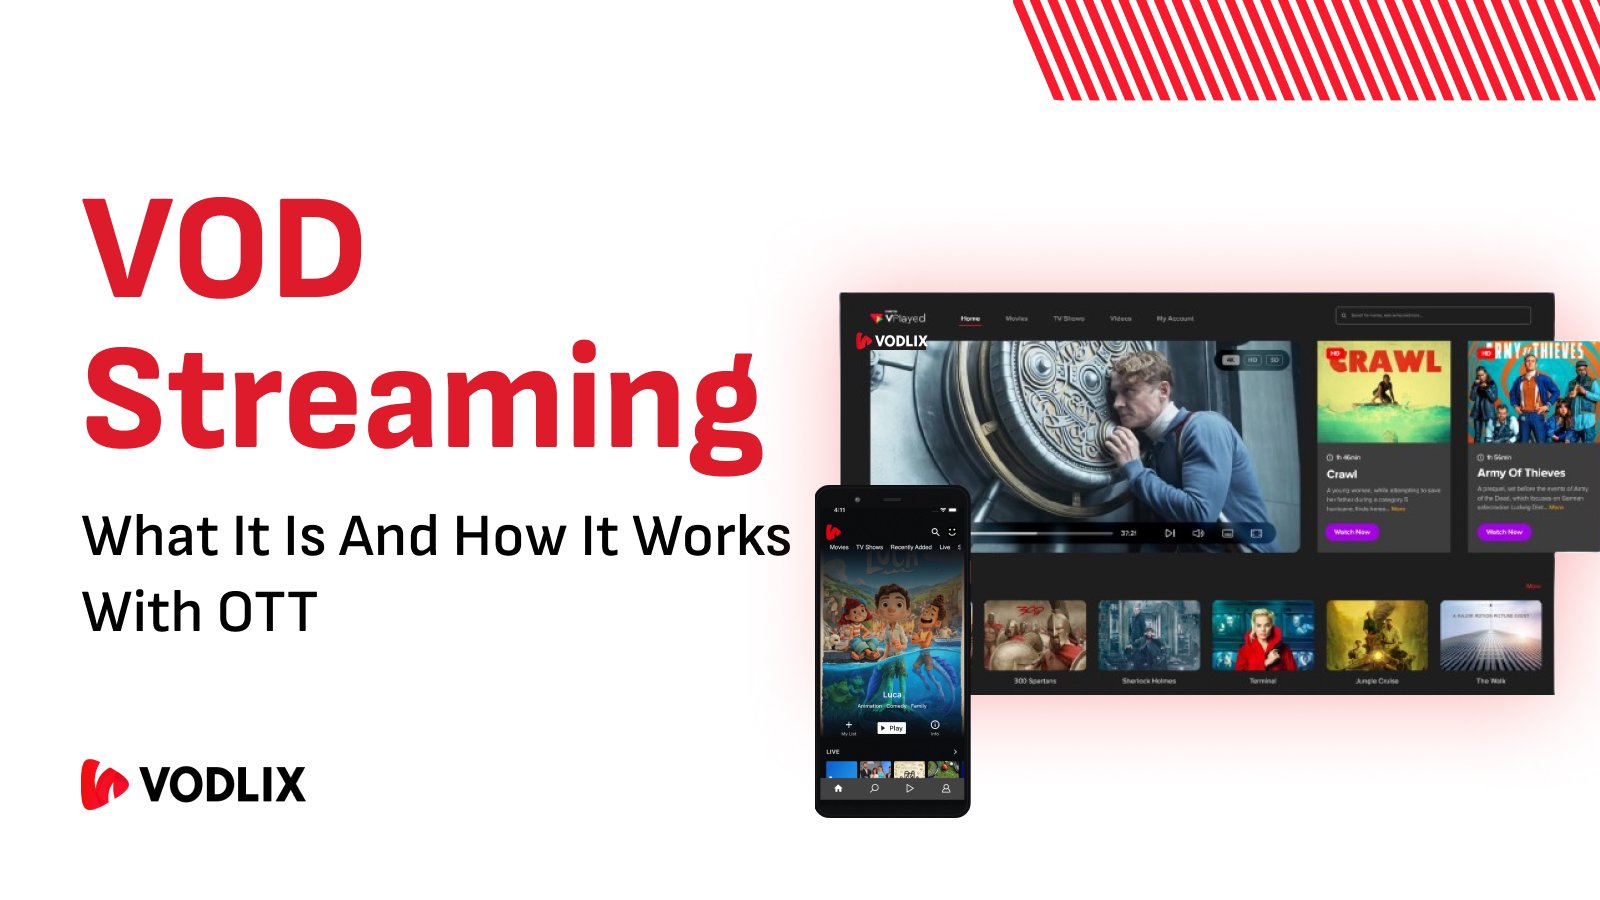 VOD Streaming – What It Is and How It Works with OTT